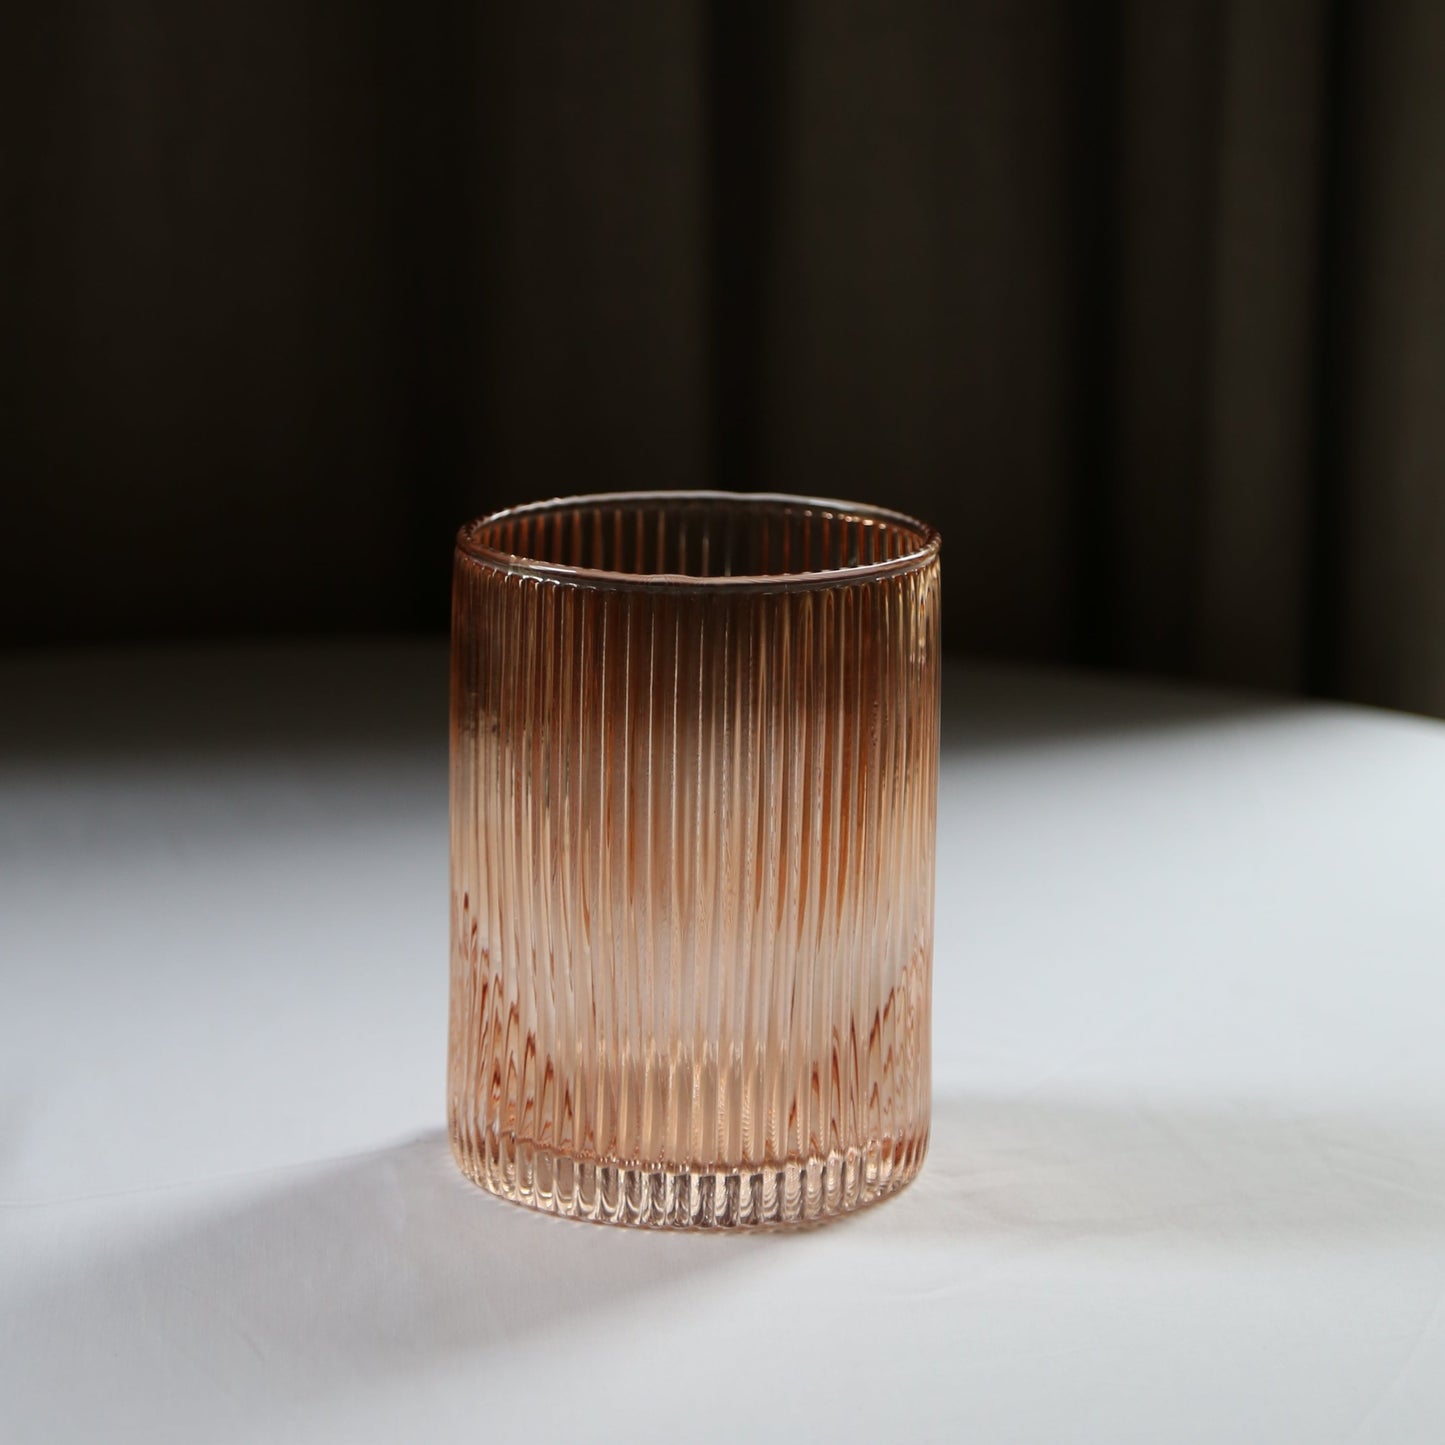 Short Bellini amber glass vase available at Rook & Rose.